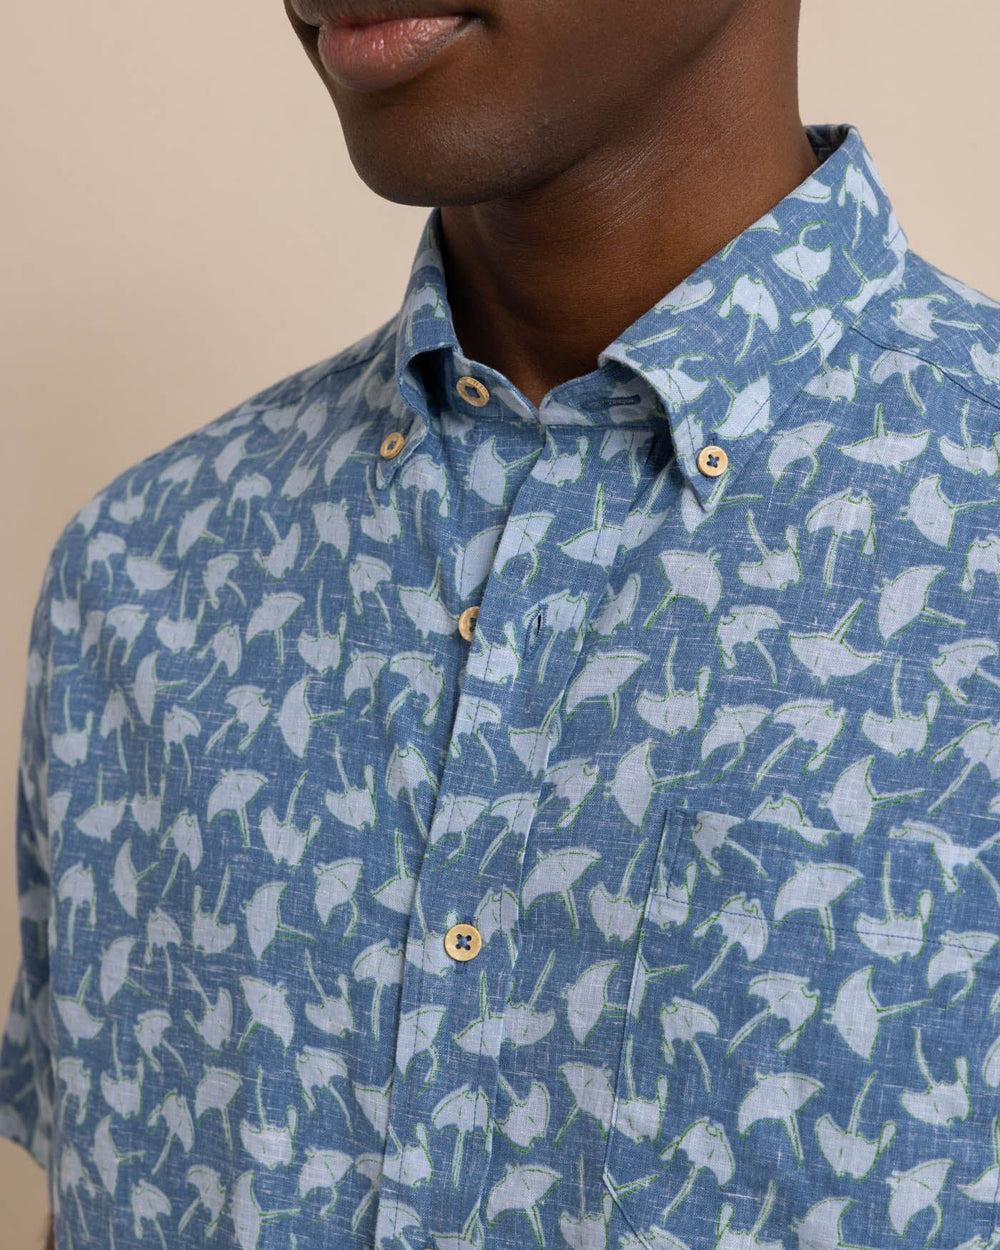 The detail view of the Southern Tide Summer Rays Short Sleeve Sport Shirt by Southern Tide - Coronet Blue